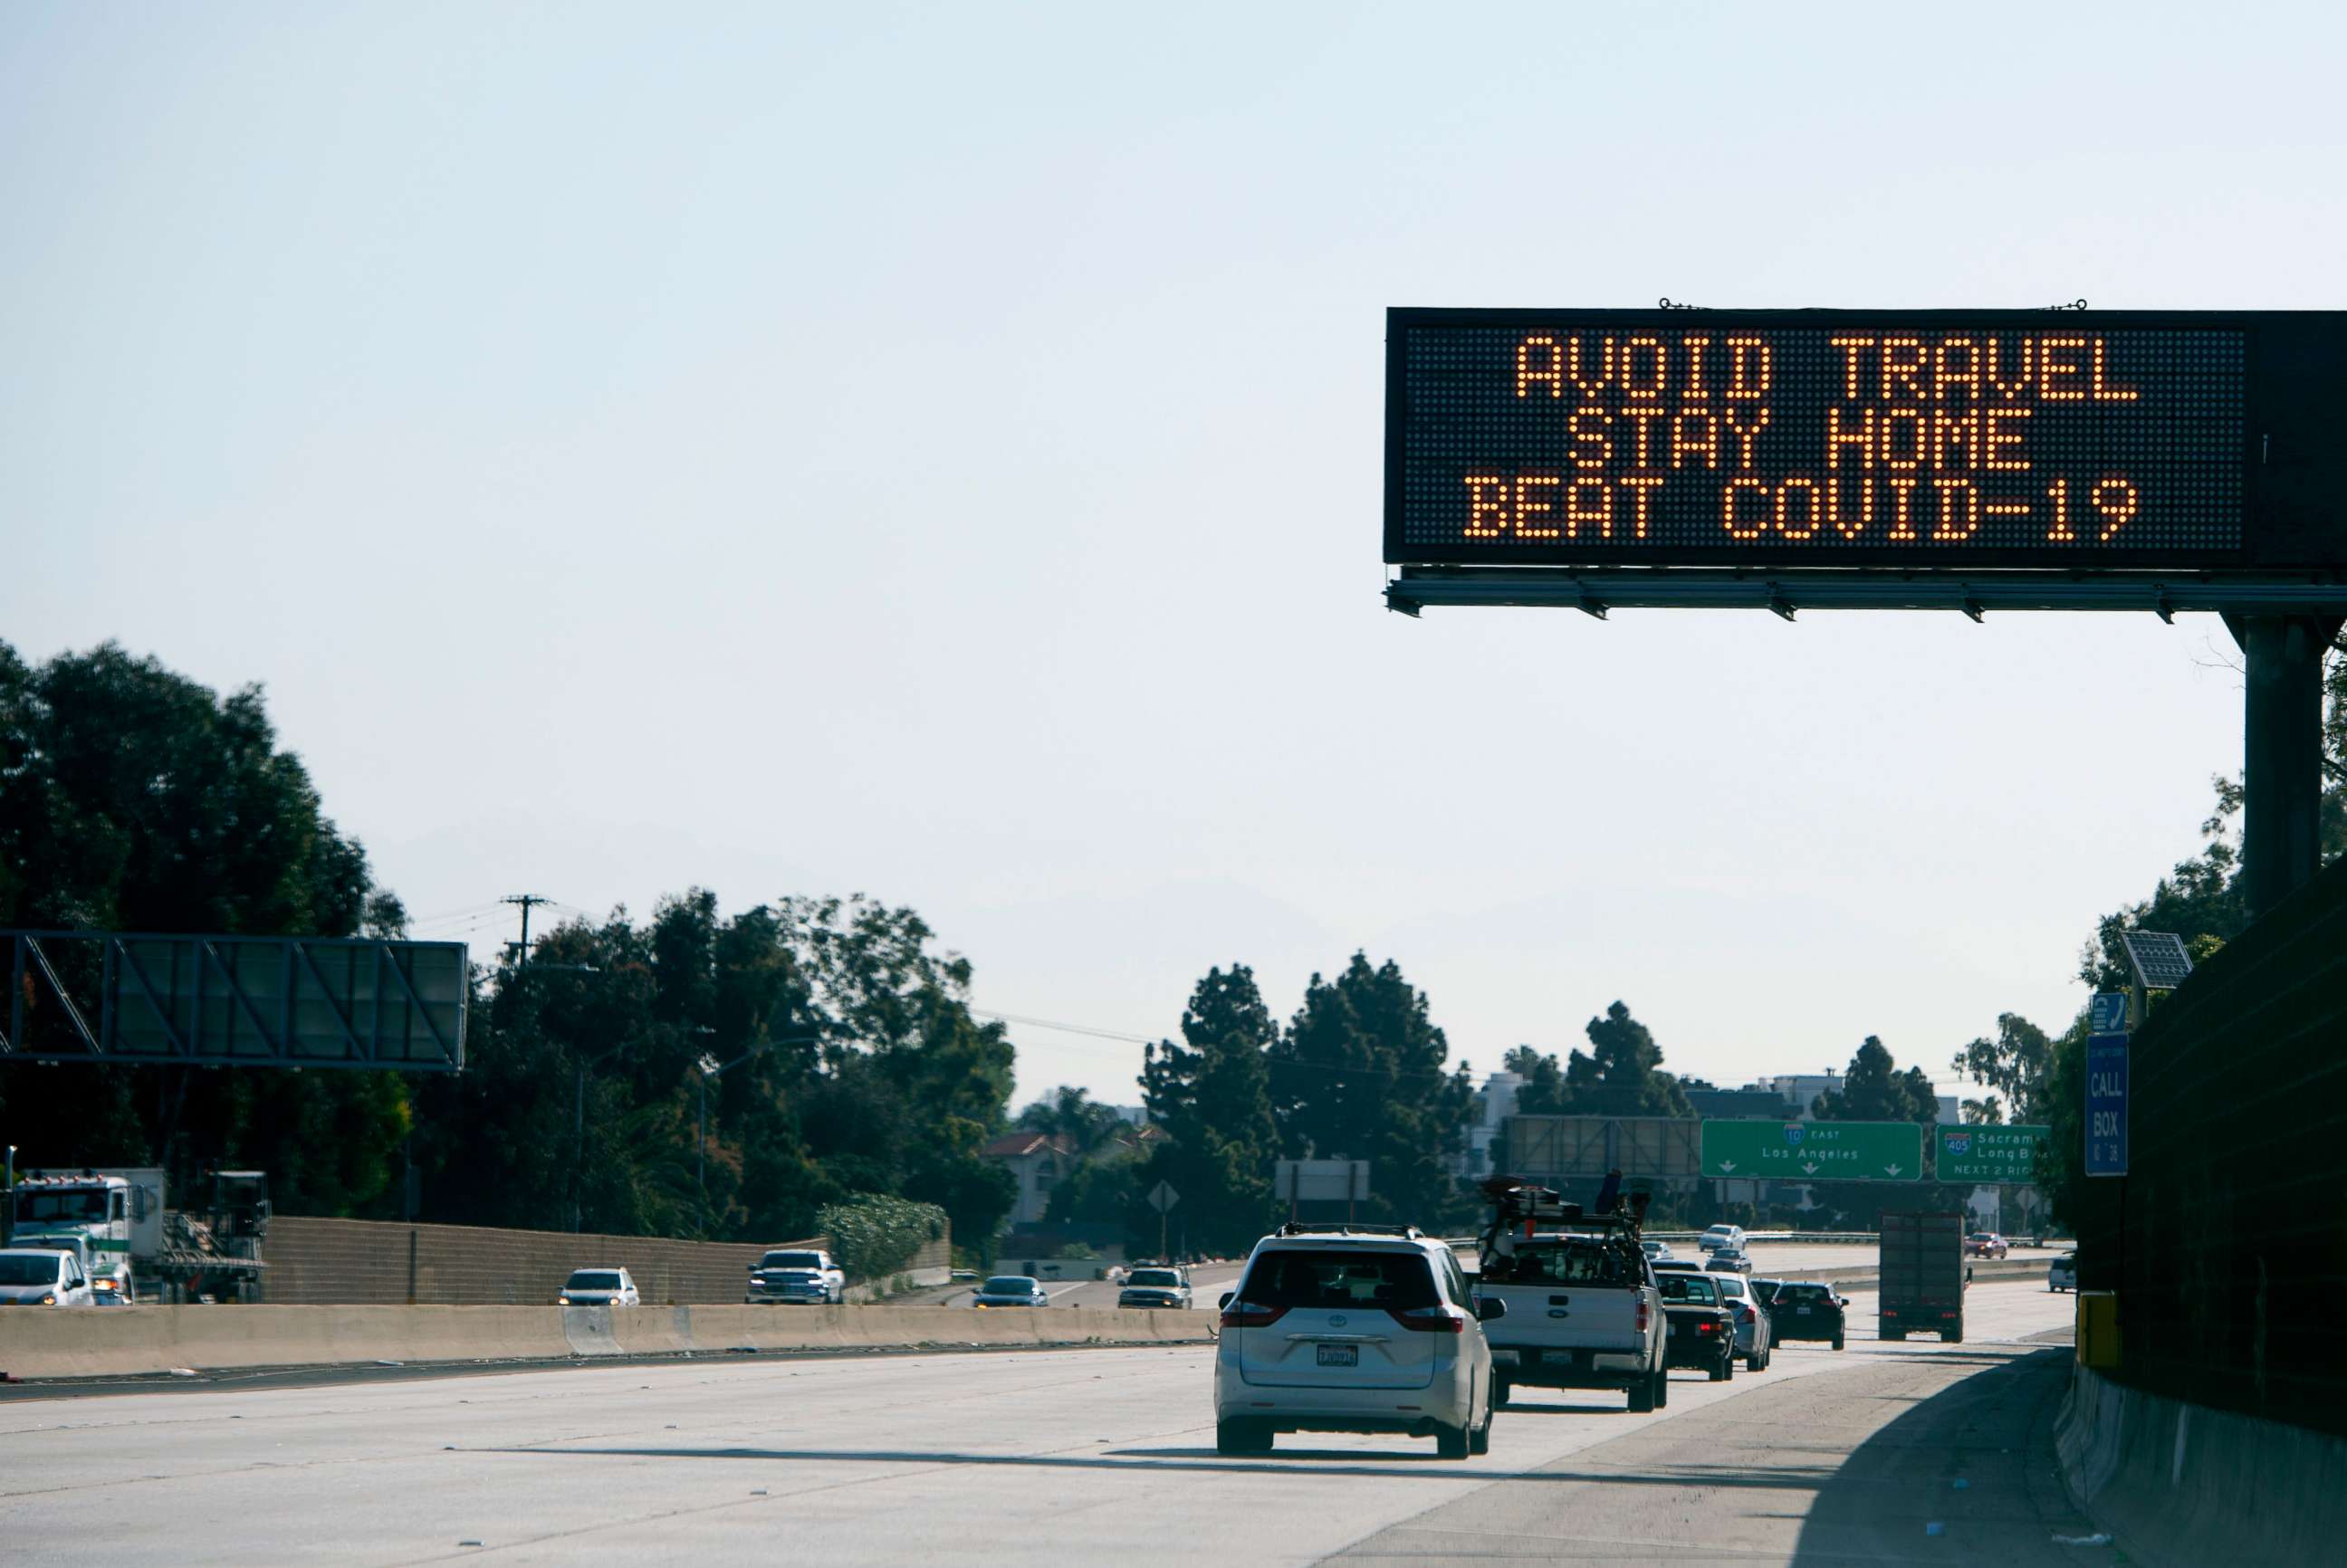 PHOTO: A sign asking for drivers to "avoid travel and stay home" due to the spread of the COVID-19, the disease caused by the novel coronavirus, is displayed over the I-10 freeway in Santa Monica, California, on April 14, 2020.